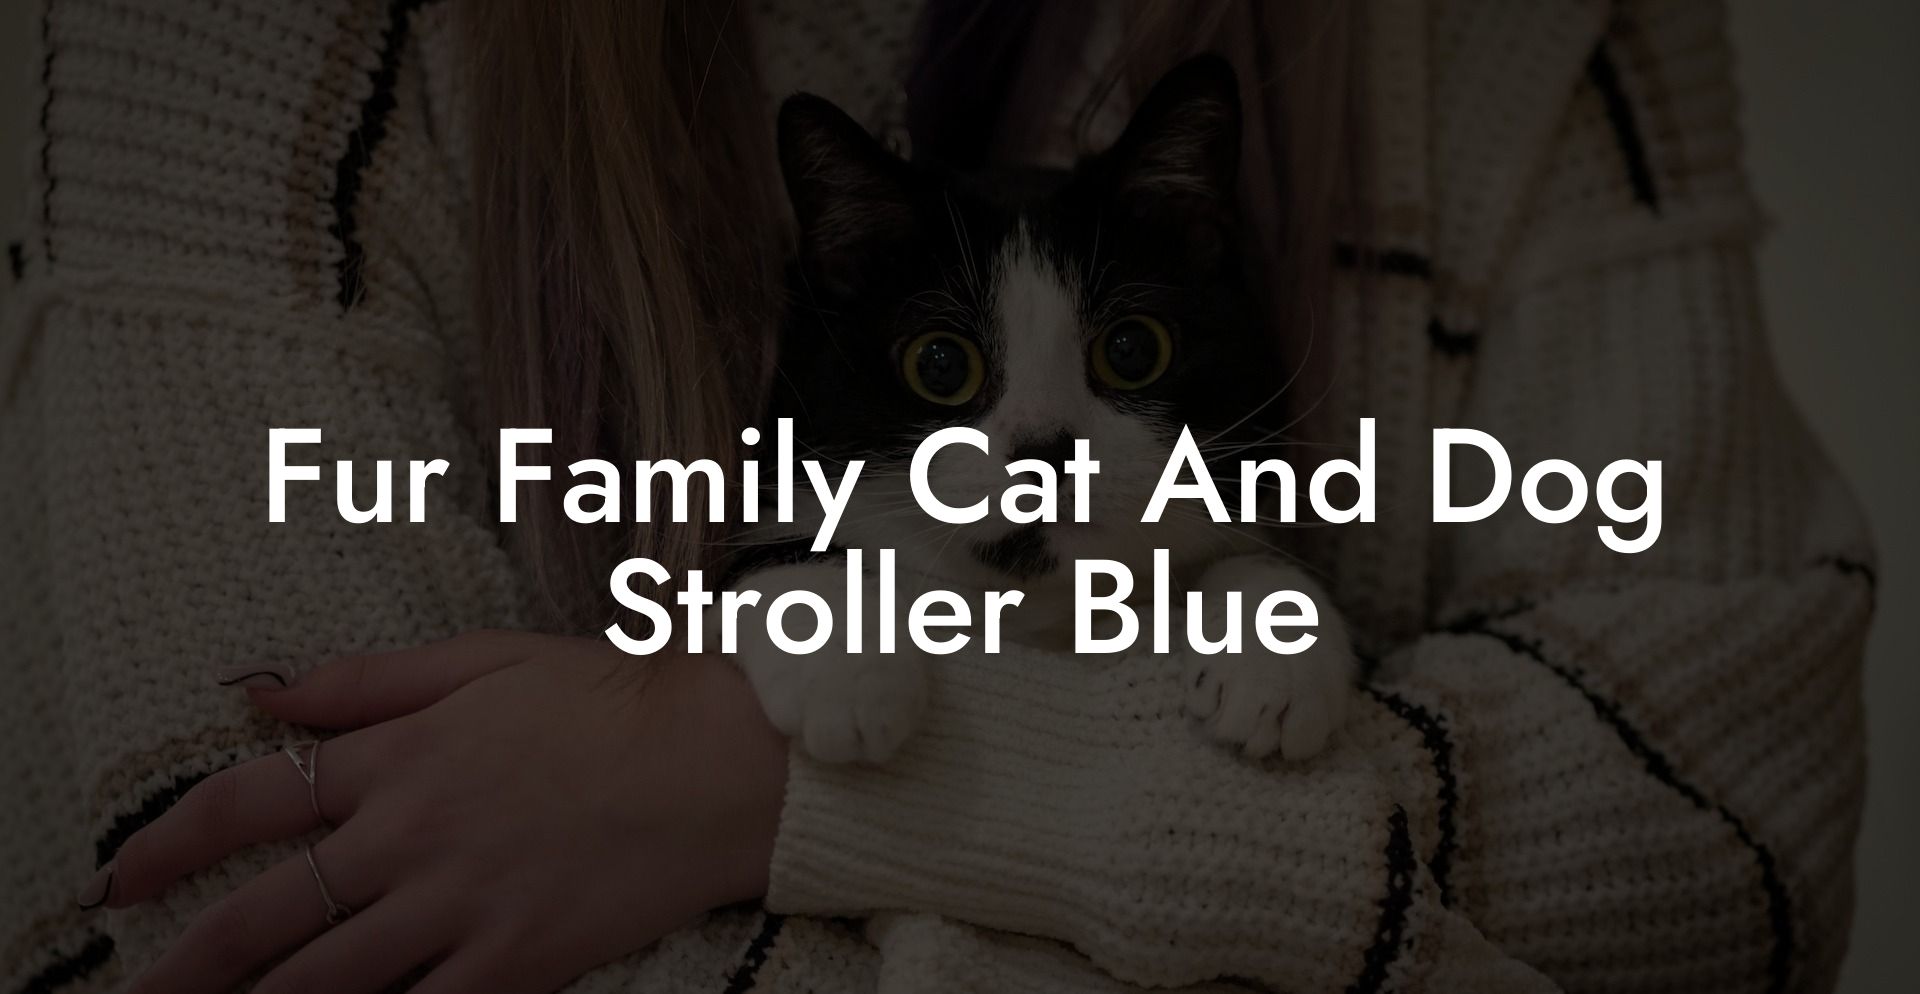 Fur Family Cat And Dog Stroller Blue